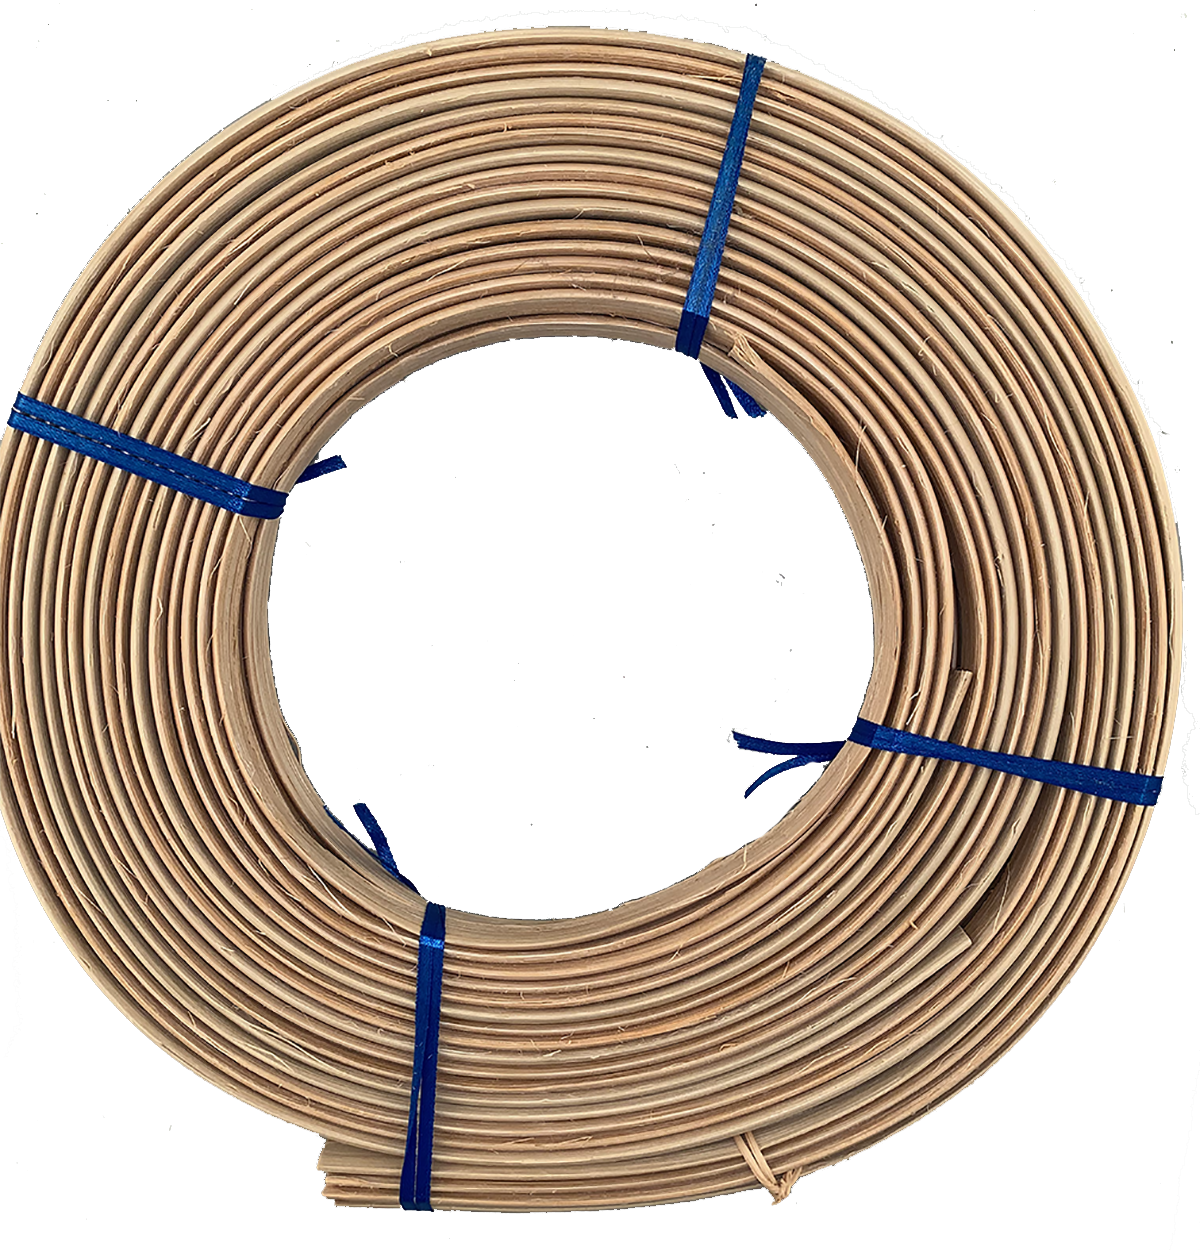 5/8 flat oval reed - 66 ft.